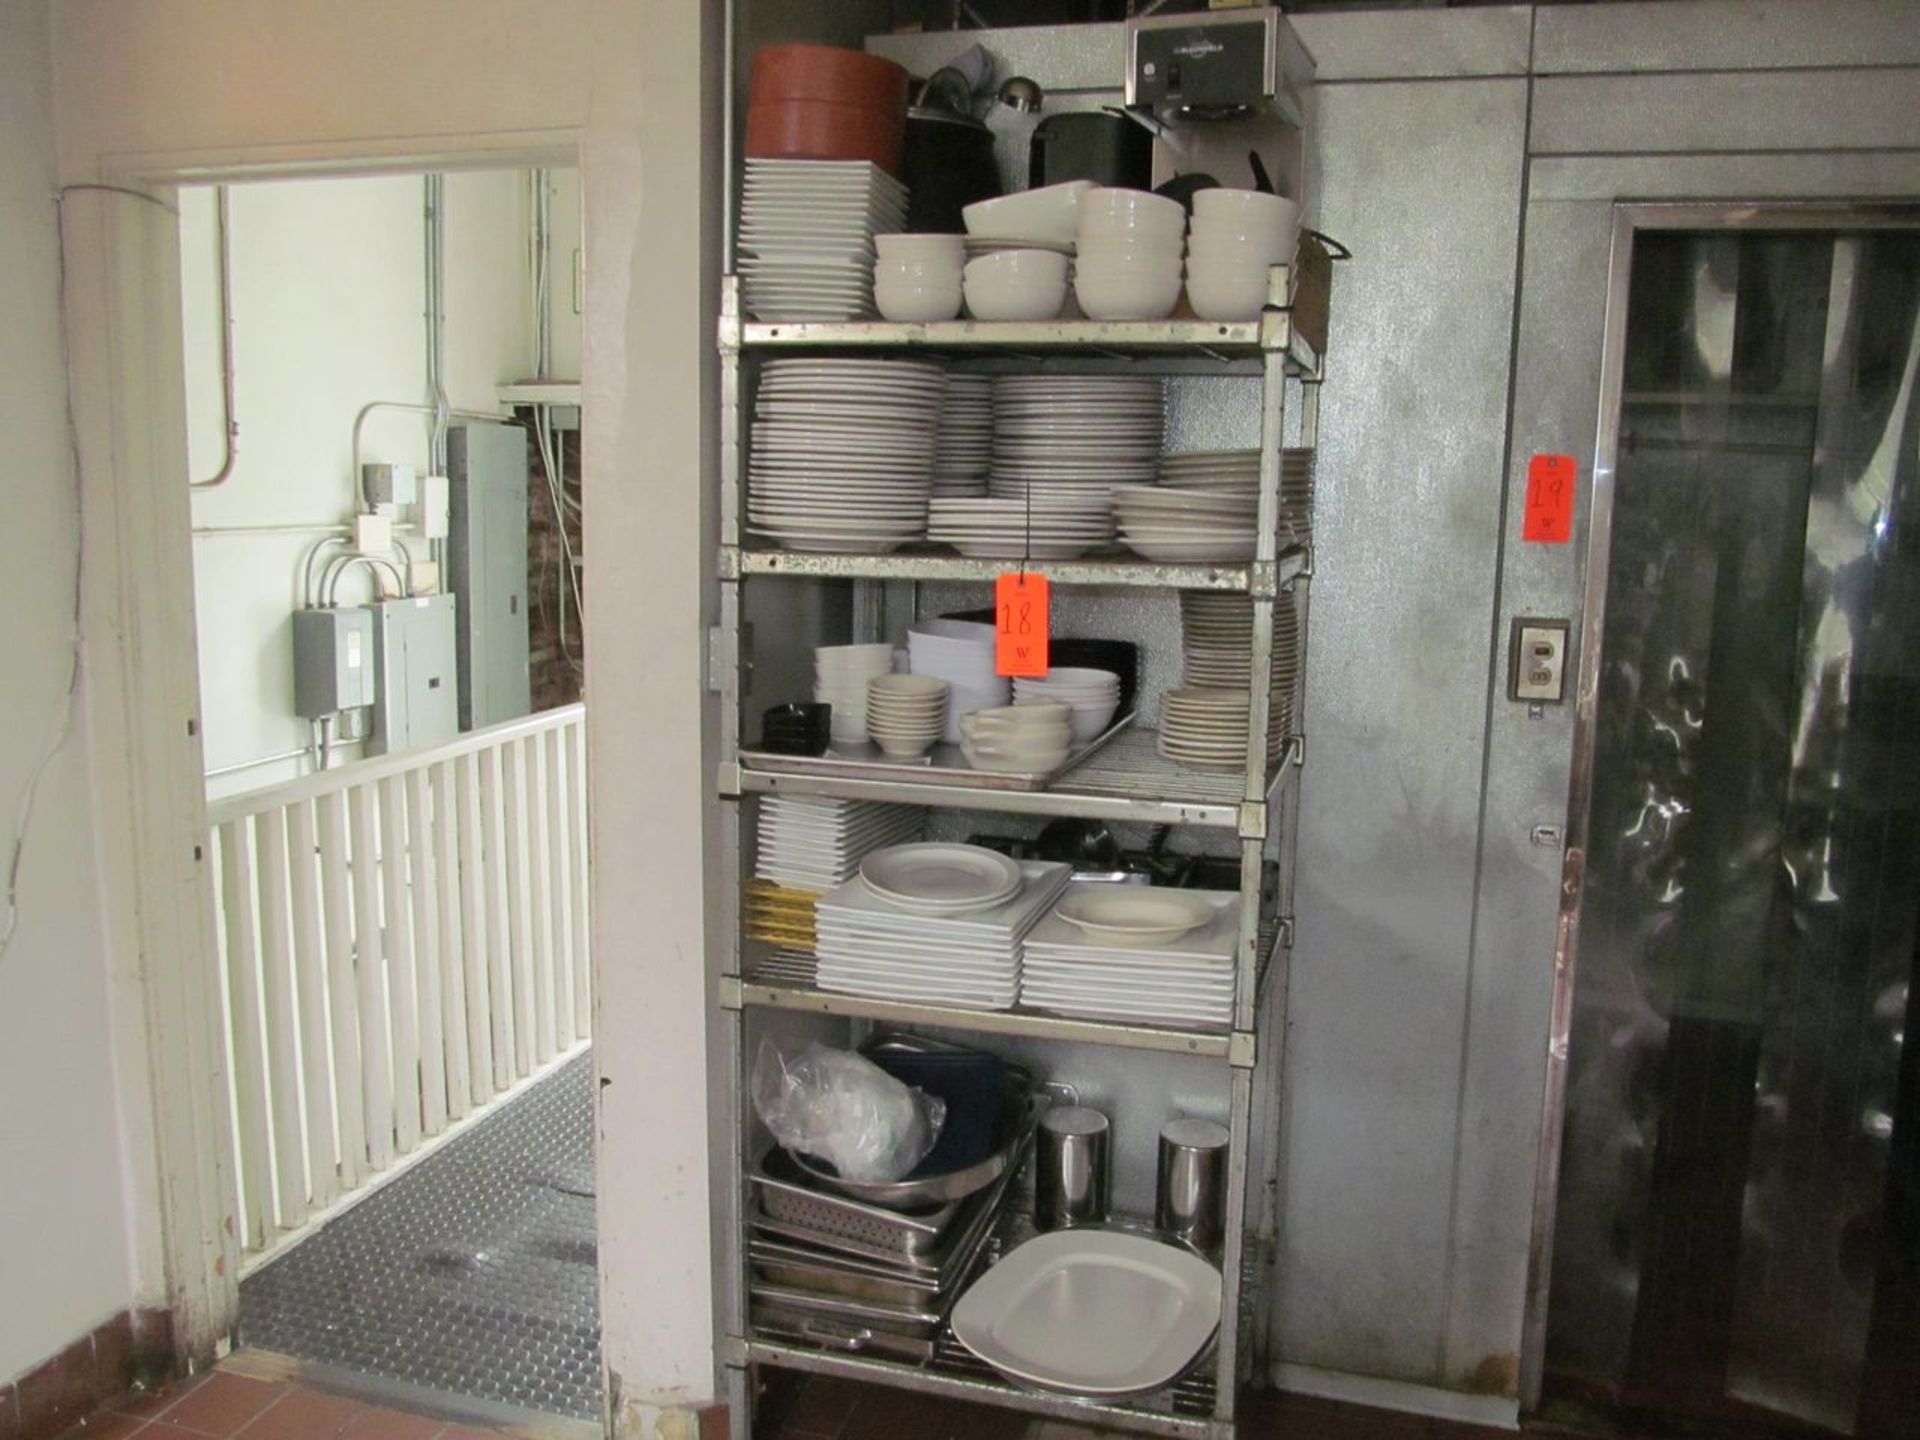 5-Tier Rack with Dishes, Serving Pieces, Misc. Pots, Coffee Maker, and Related Contents (Upstairs